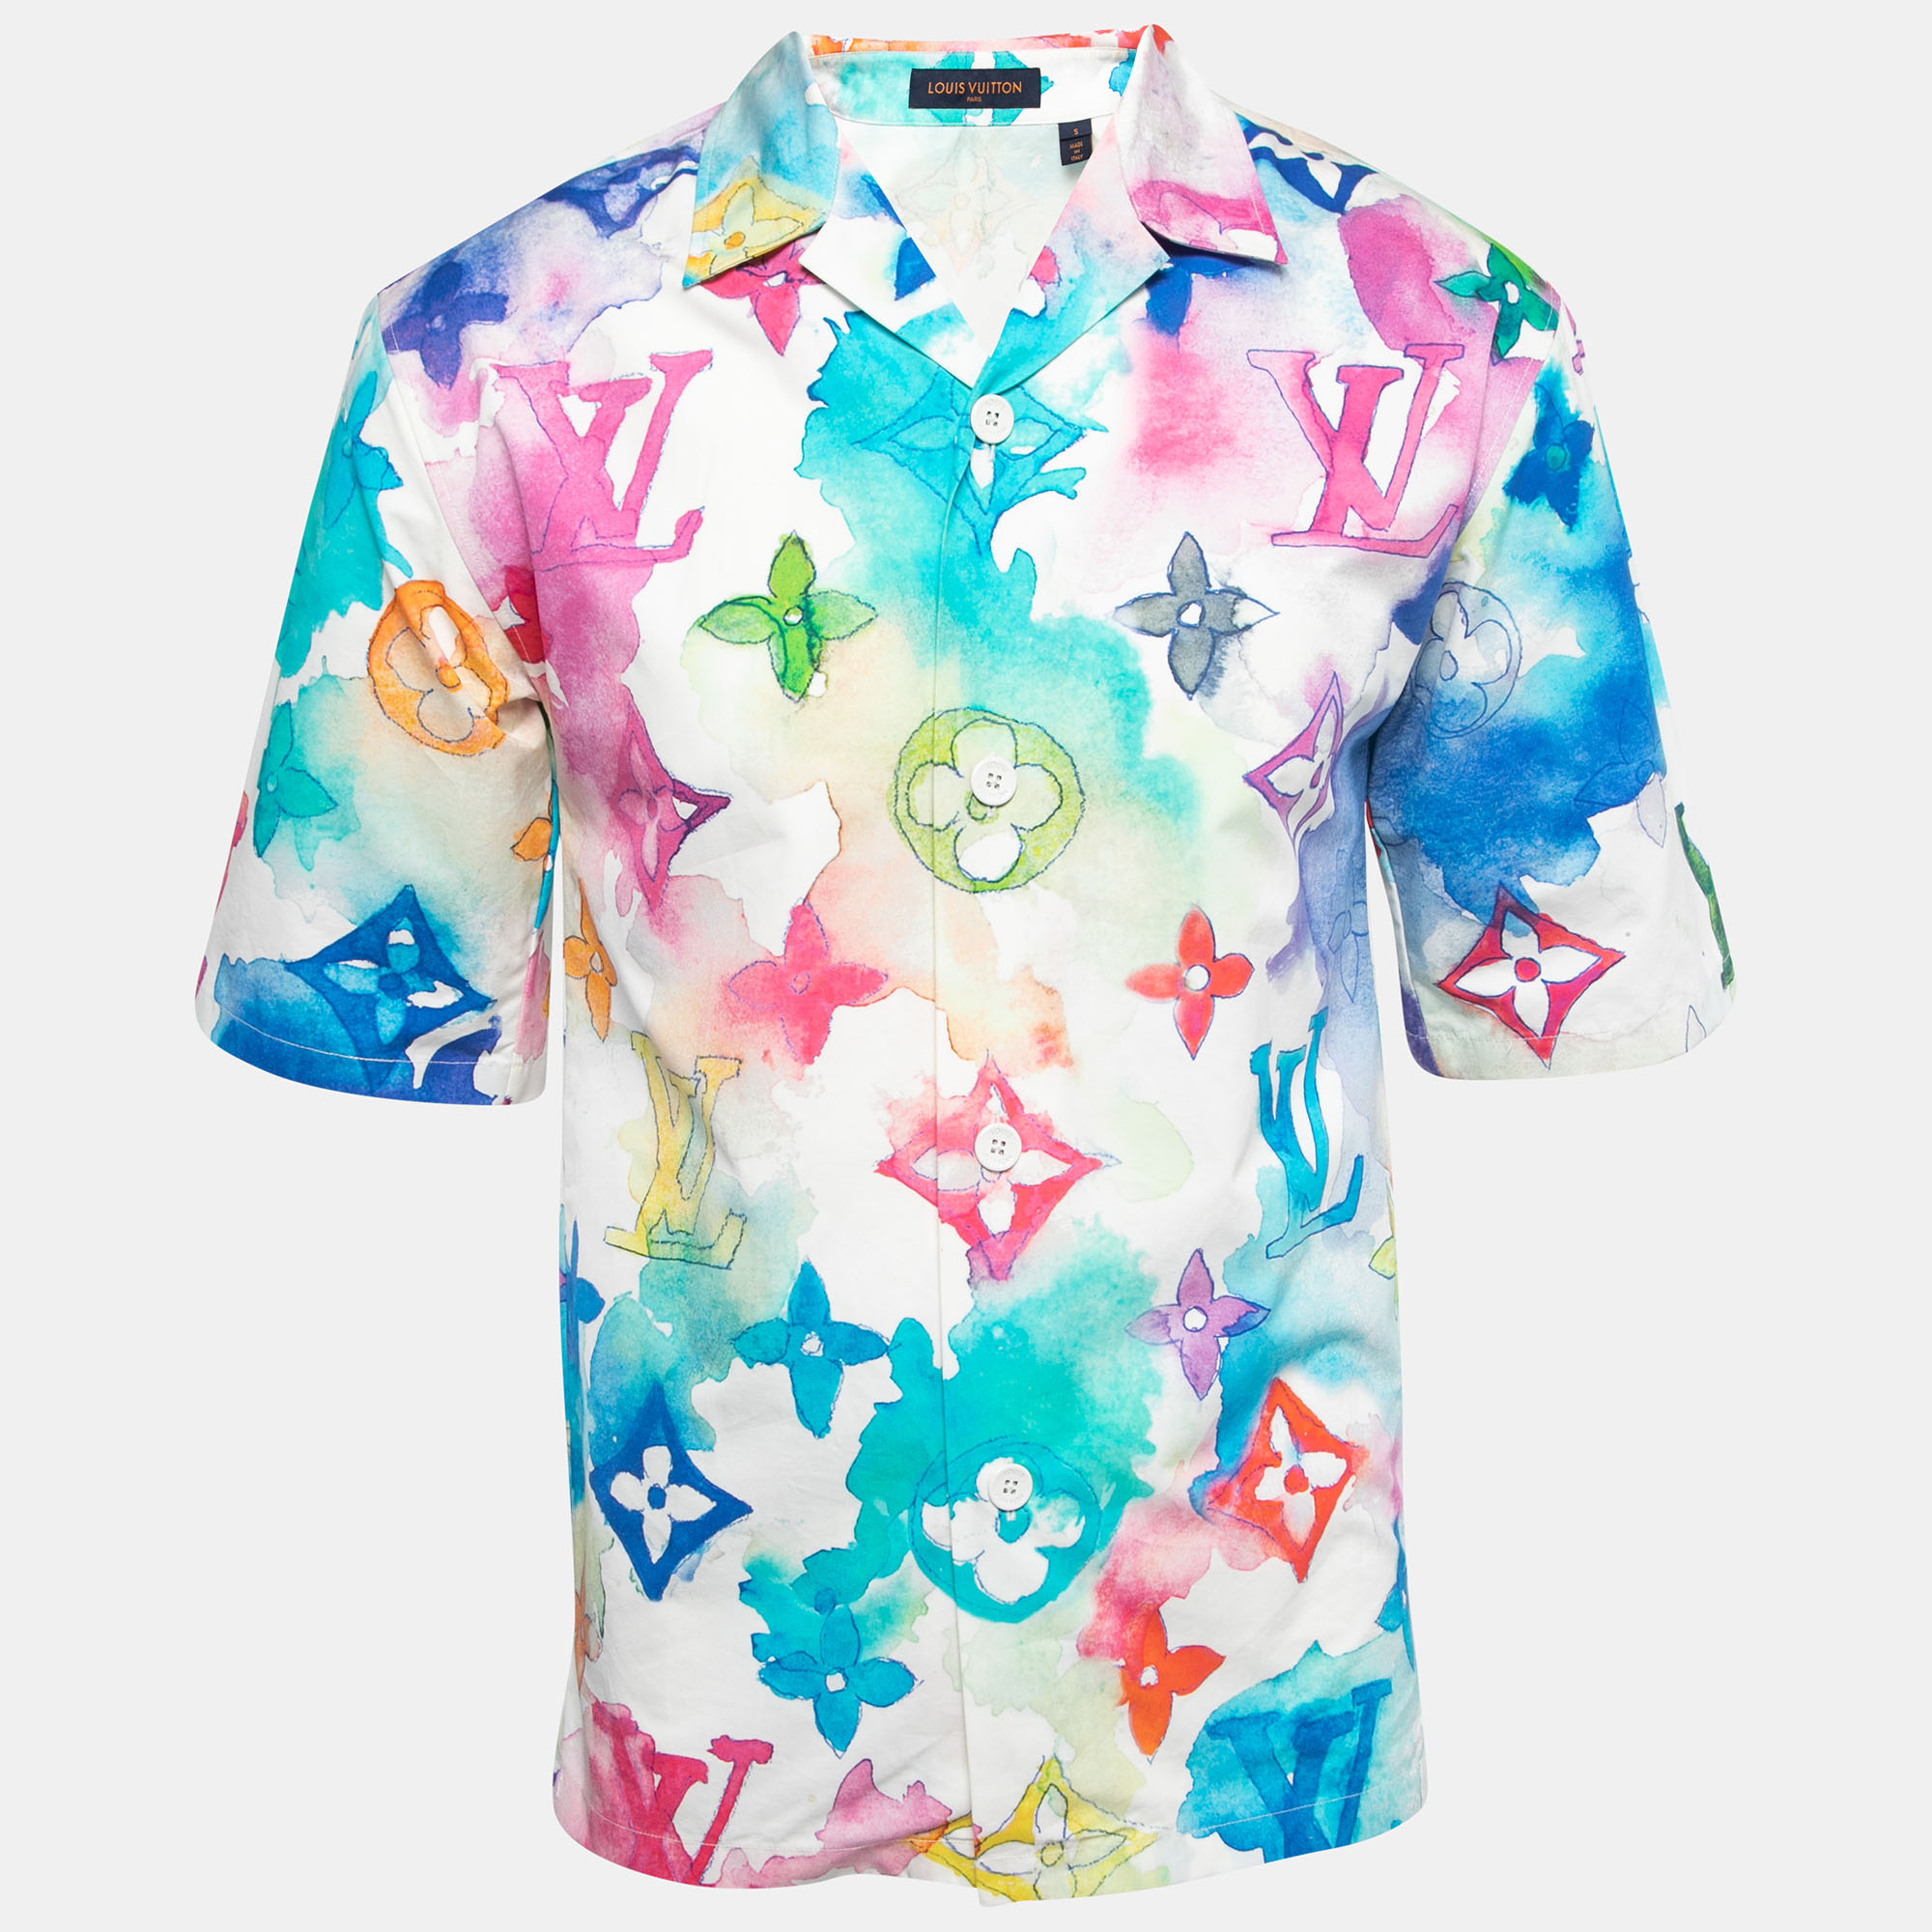 Products by Louis Vuitton: Tee Shirt Watercolor Monogram